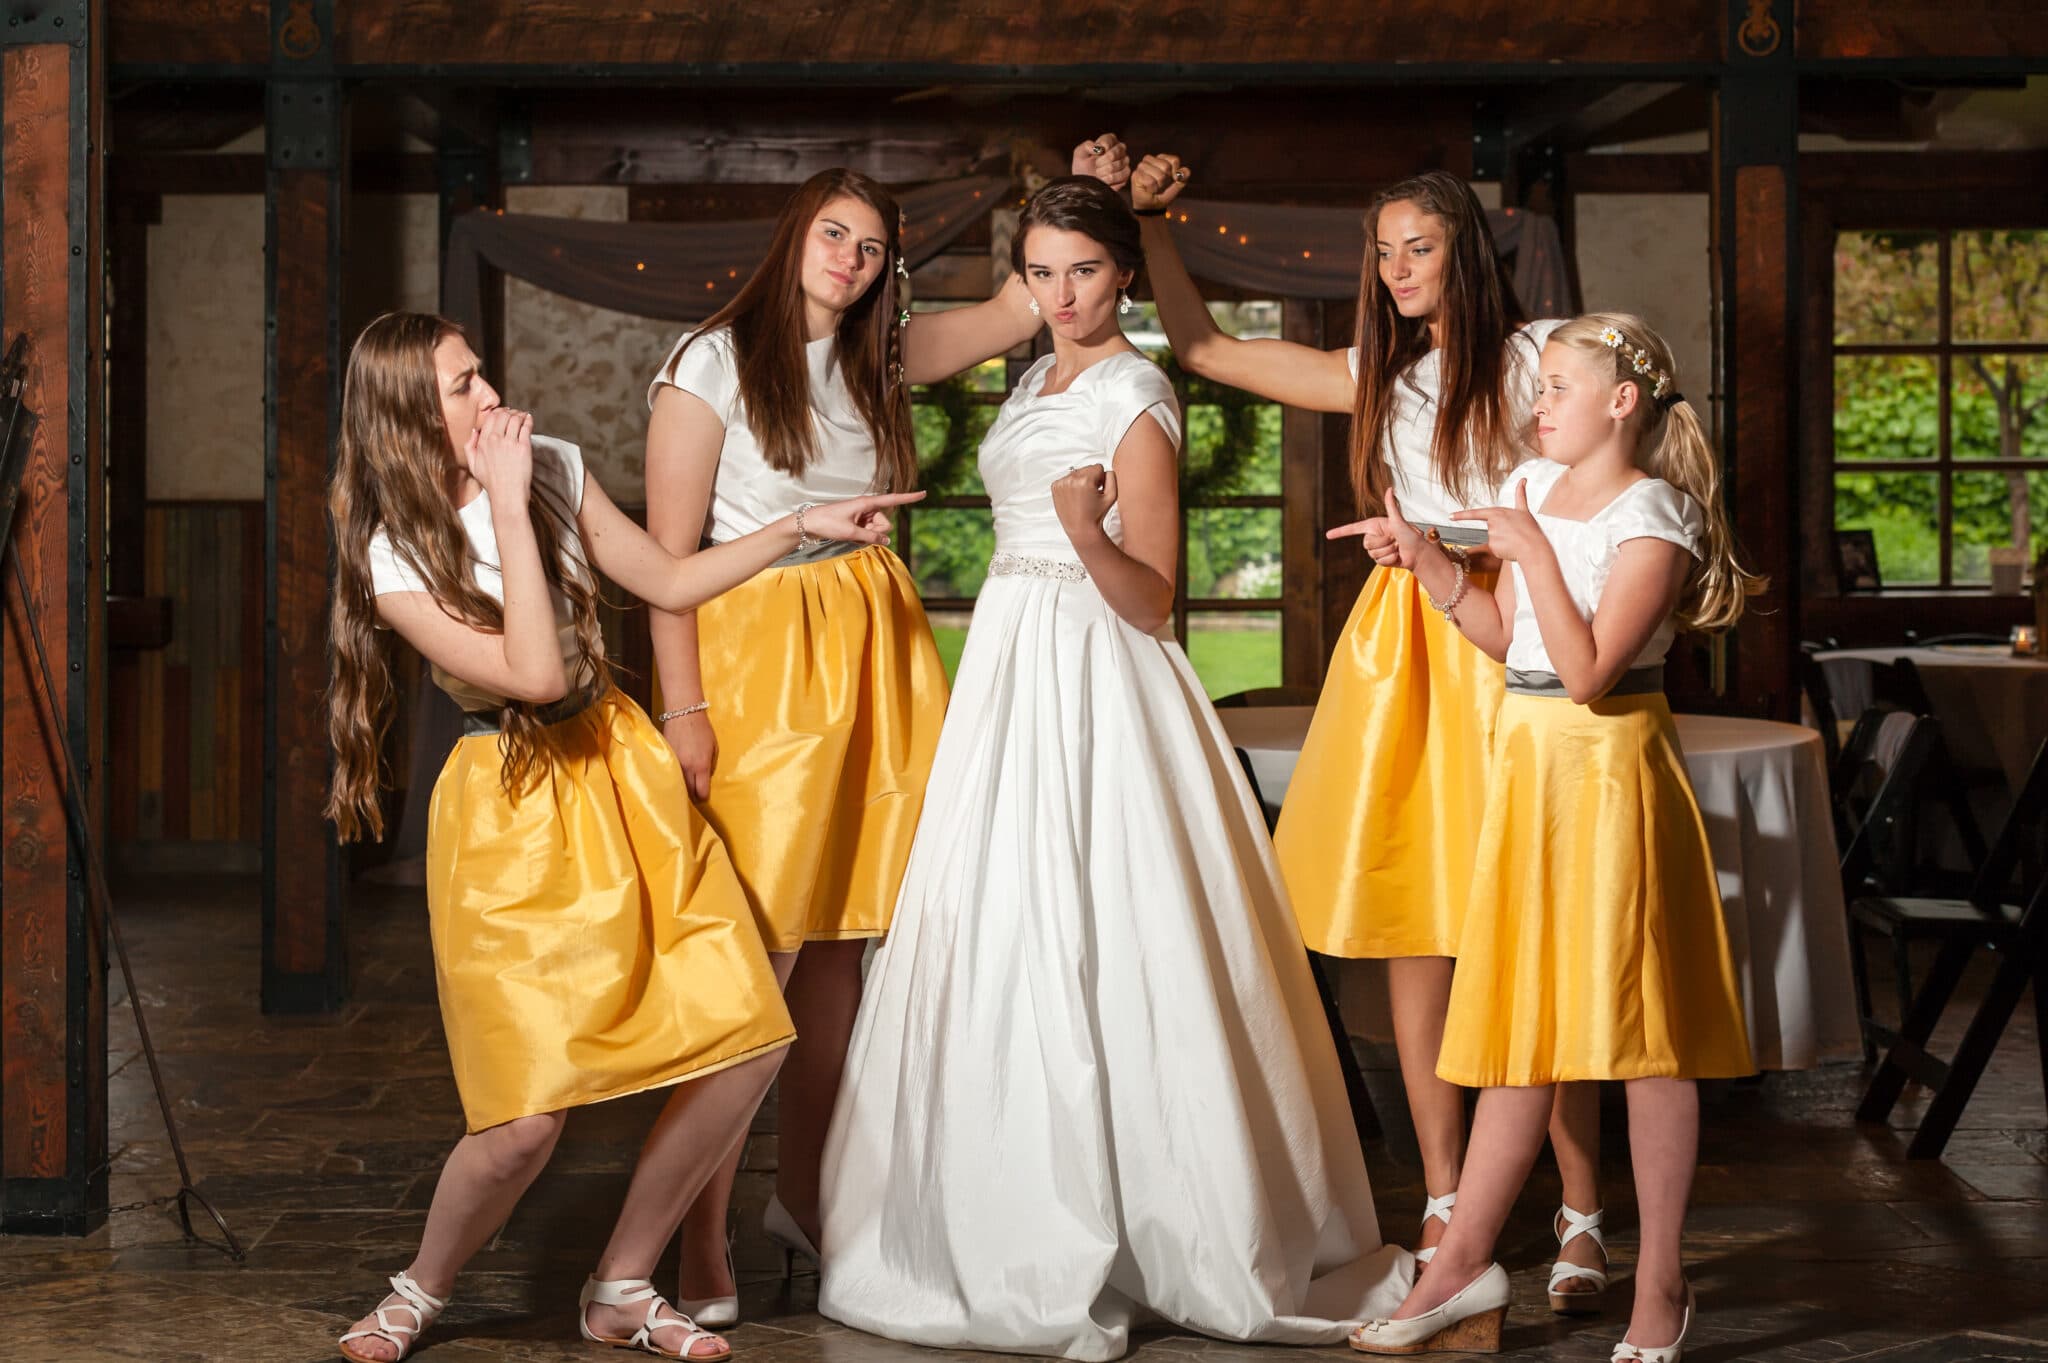 Strong bride and bridesmaids flex their muscles and act tough during their photo session.